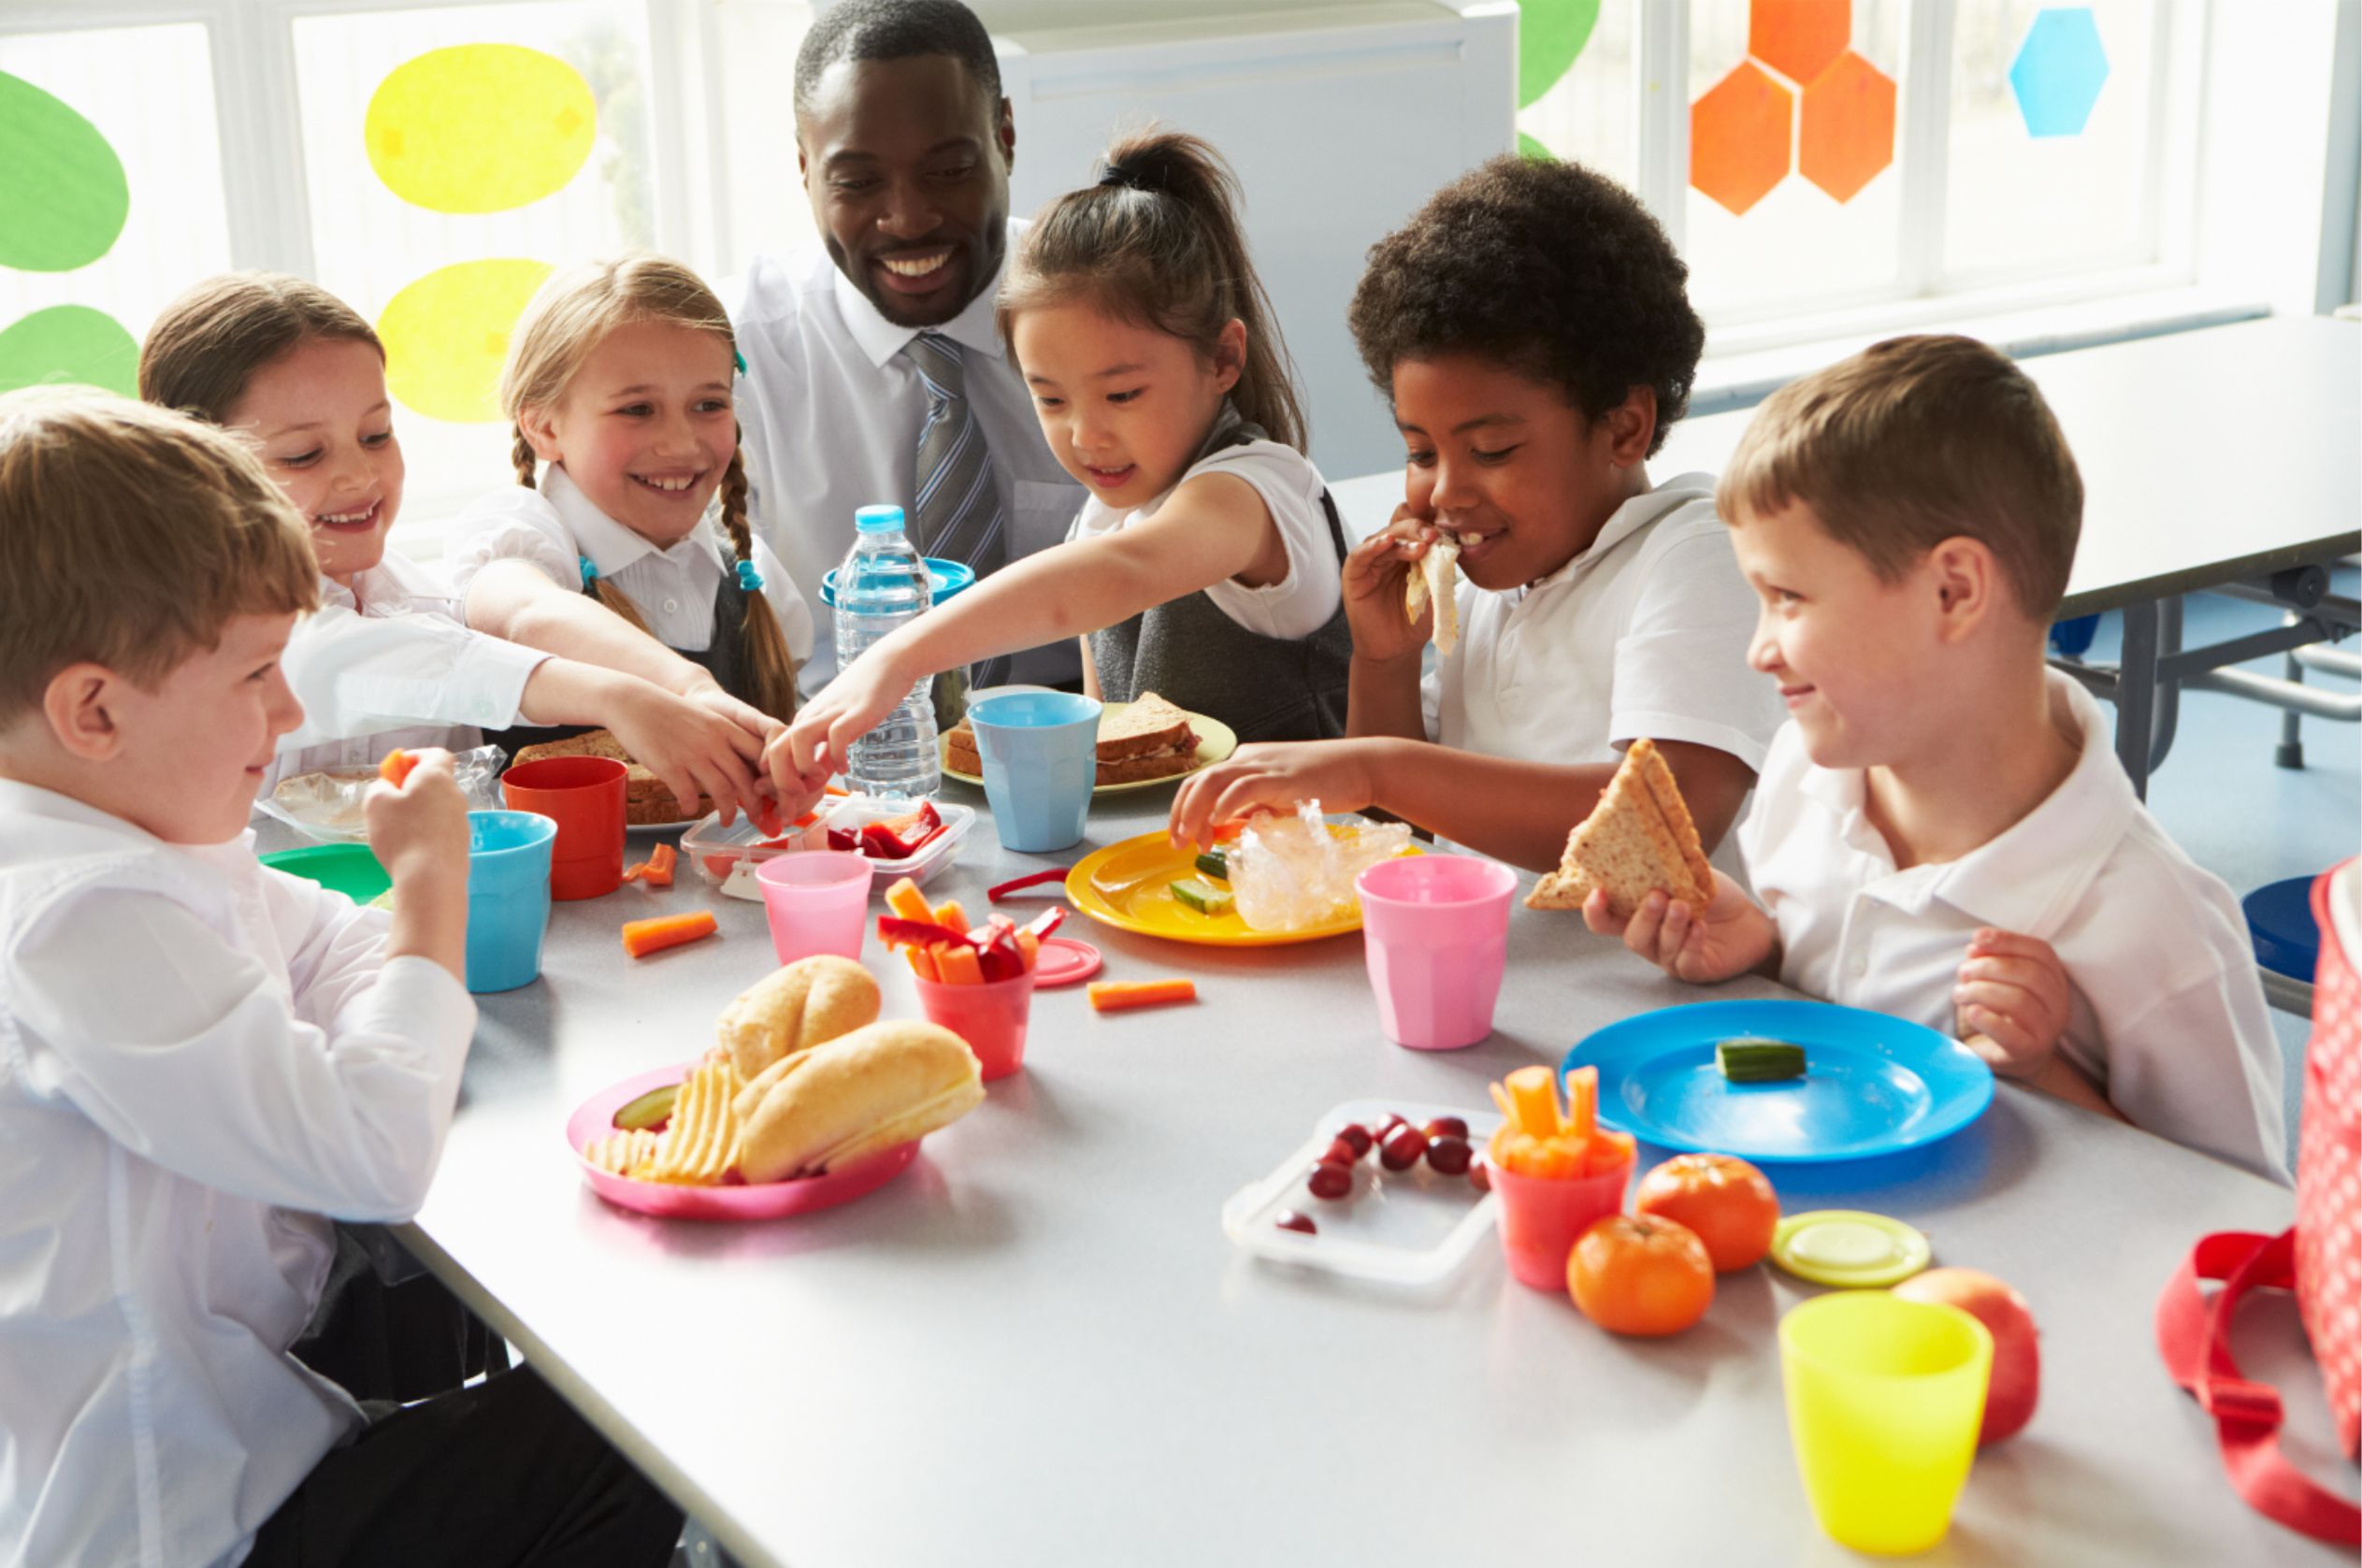 The Changing Nutritional Needs of Children